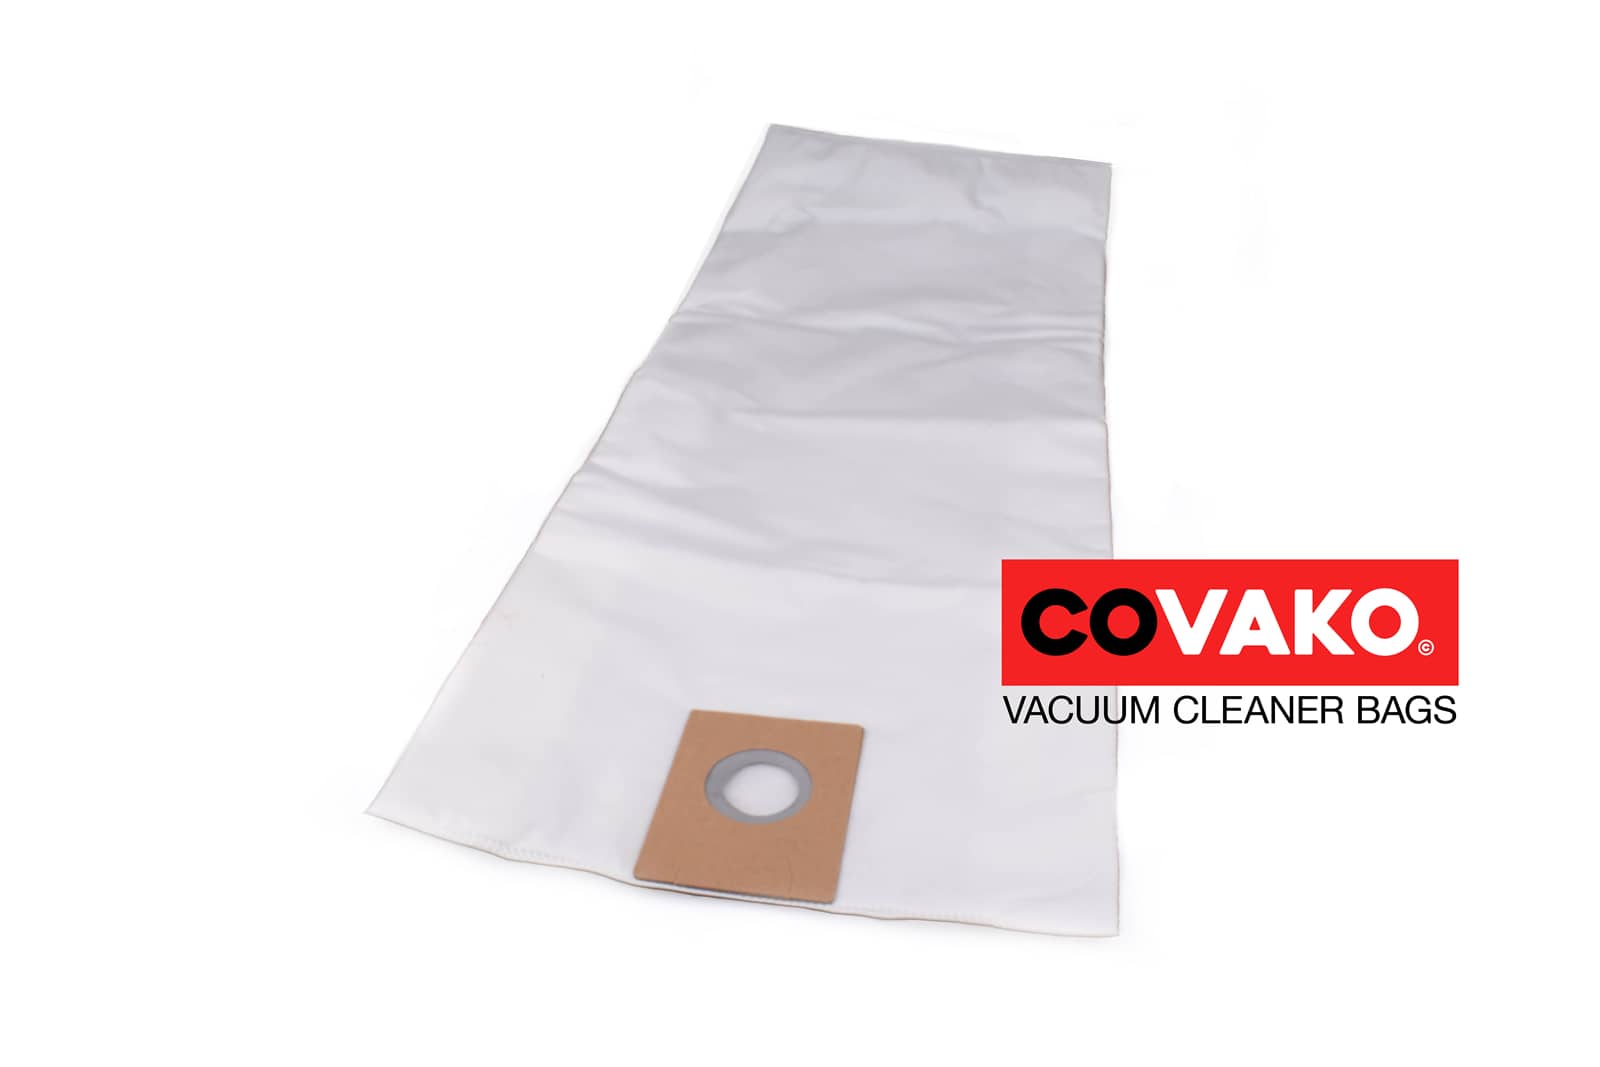 Viper LSU 275 / Synthesis - Viper vacuum cleaner bags